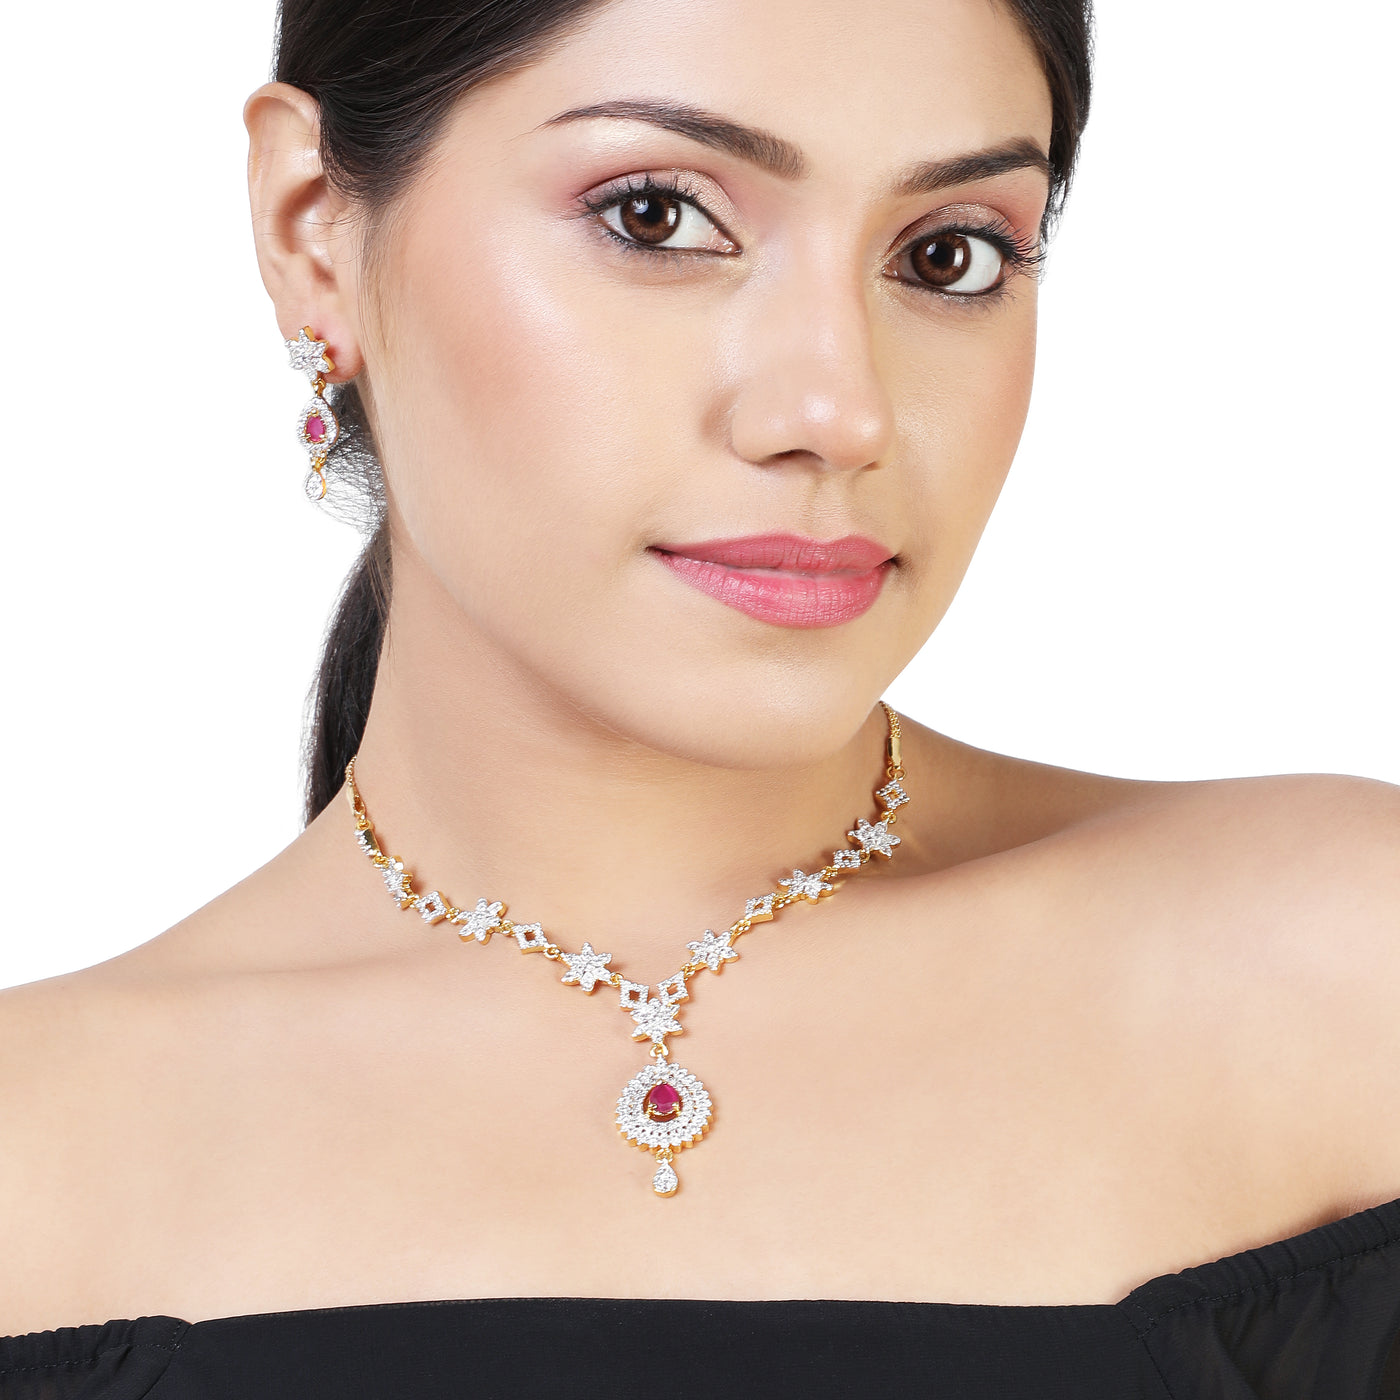 Estele - 24 CT gold plated Necklace Set with Austrian Crystals and Ruby stone drops for Women